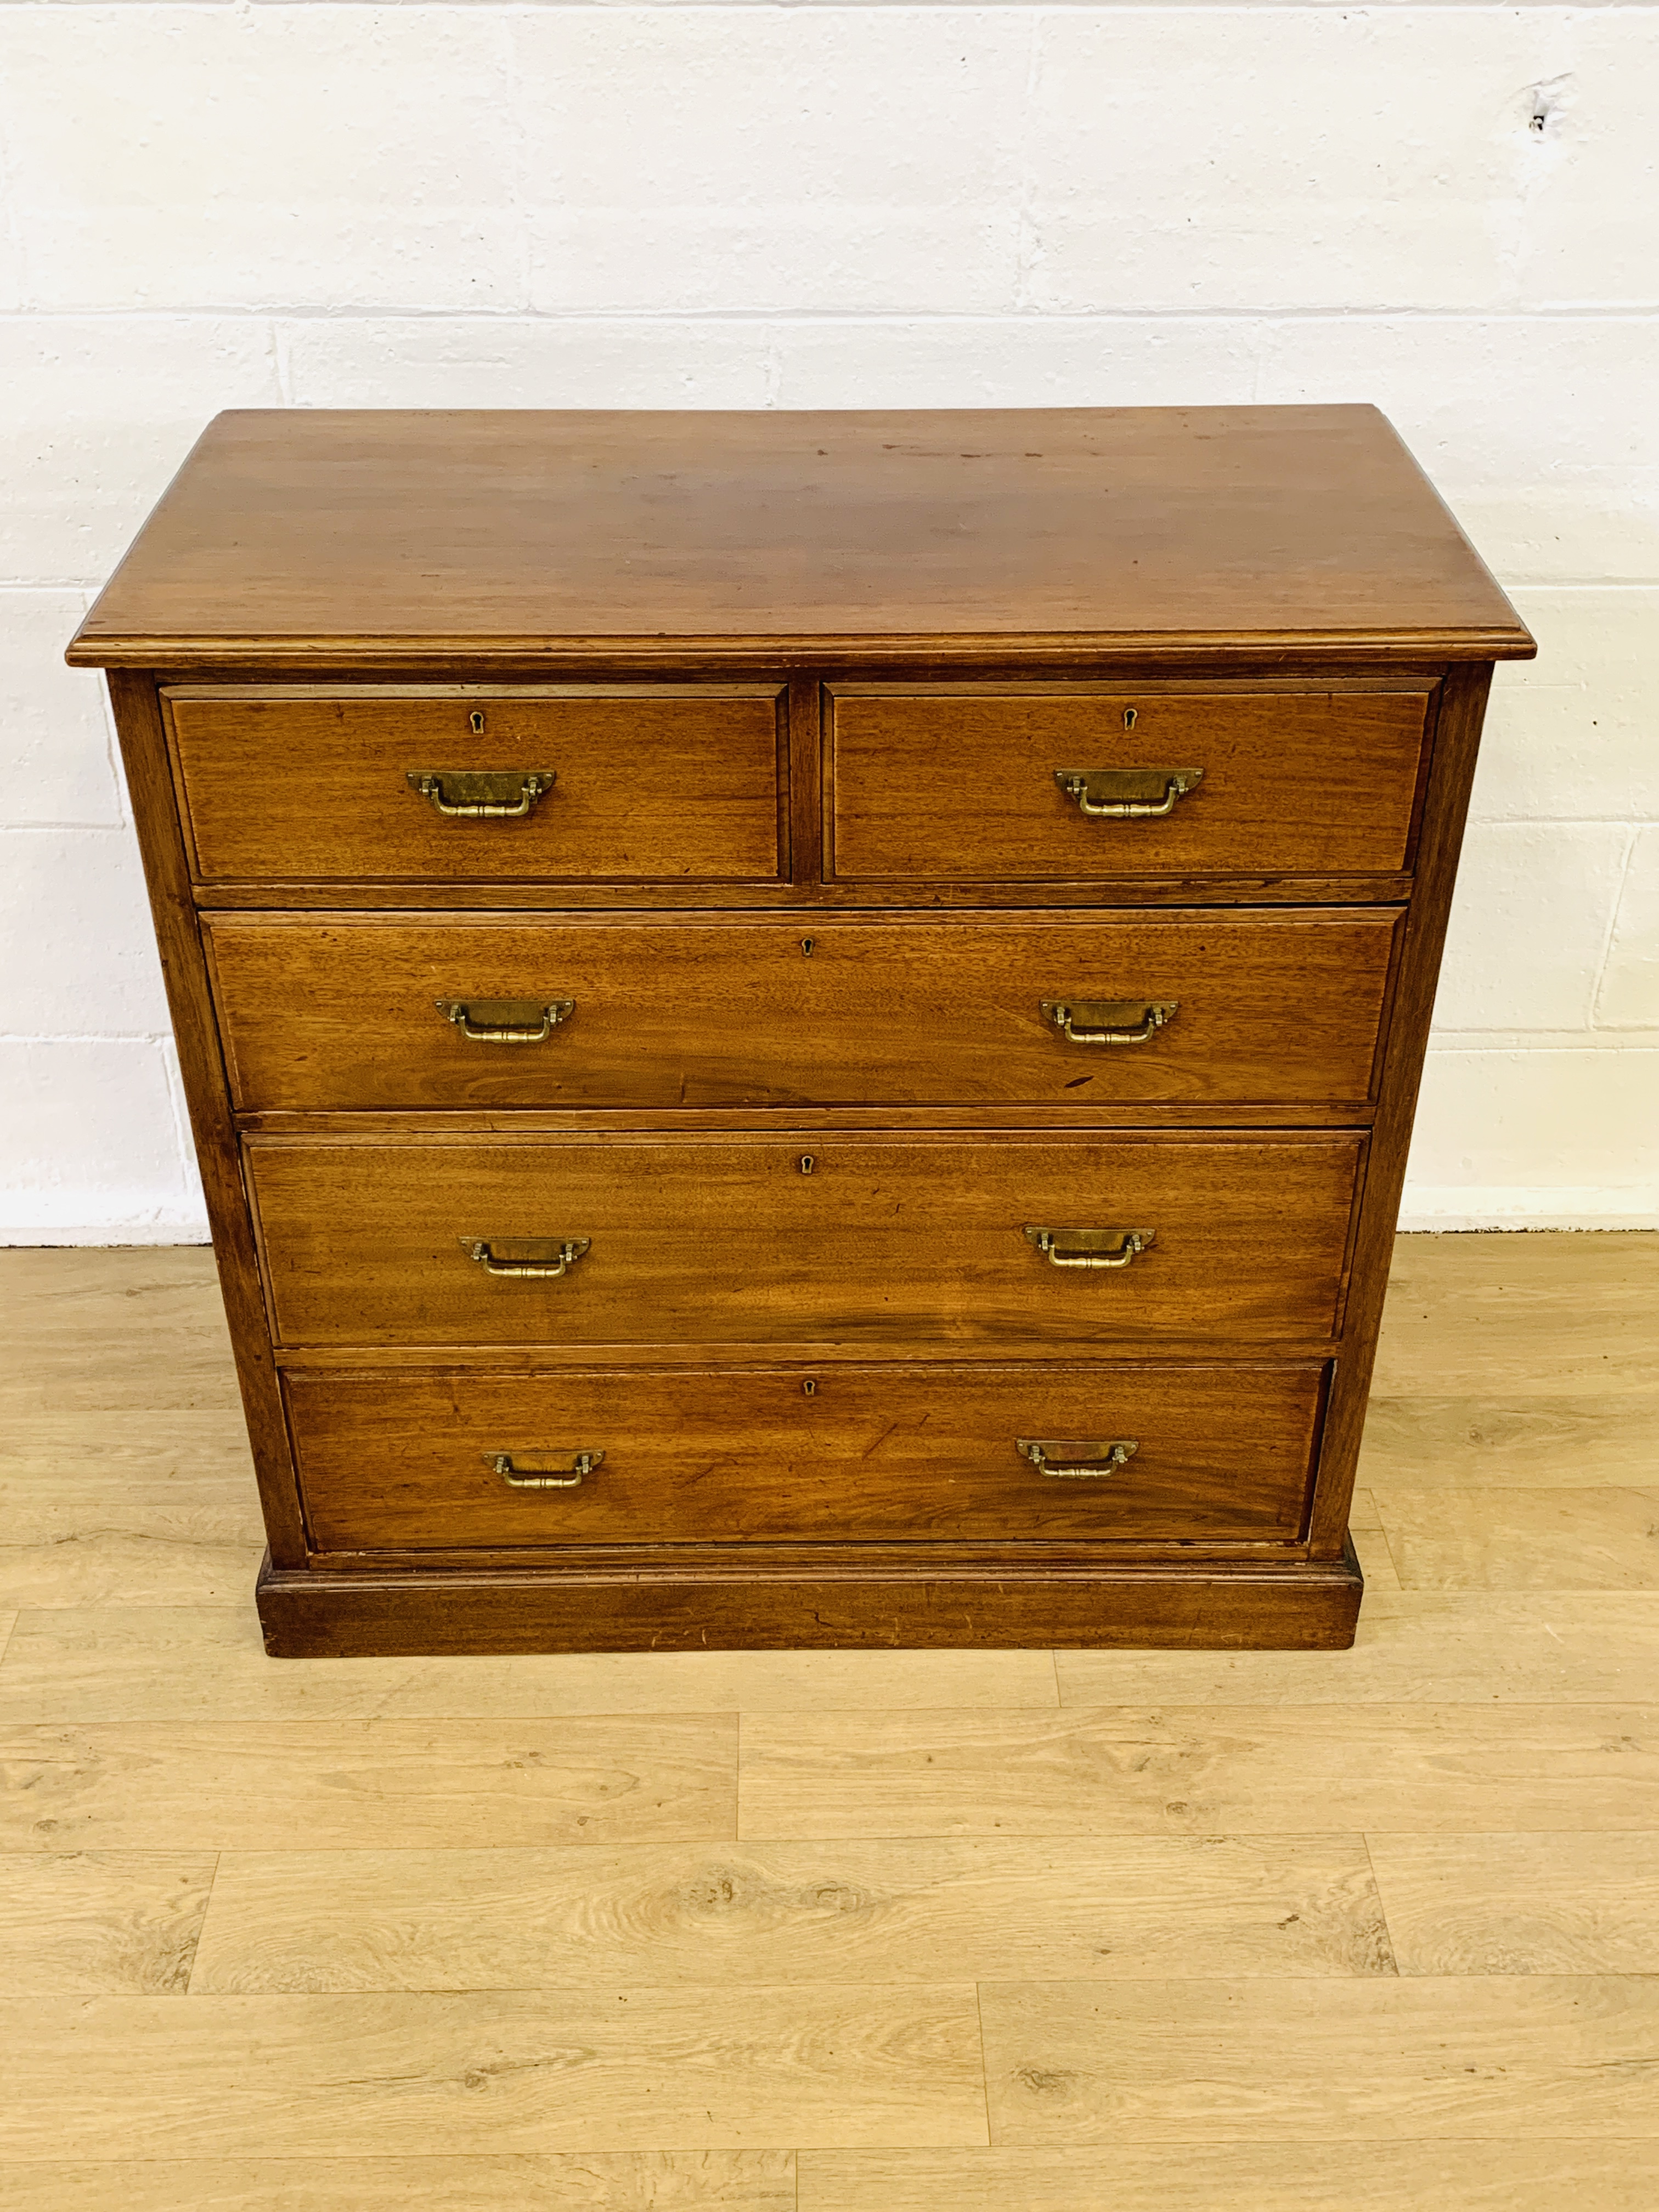 Mahogany chest of drawers - Image 7 of 8